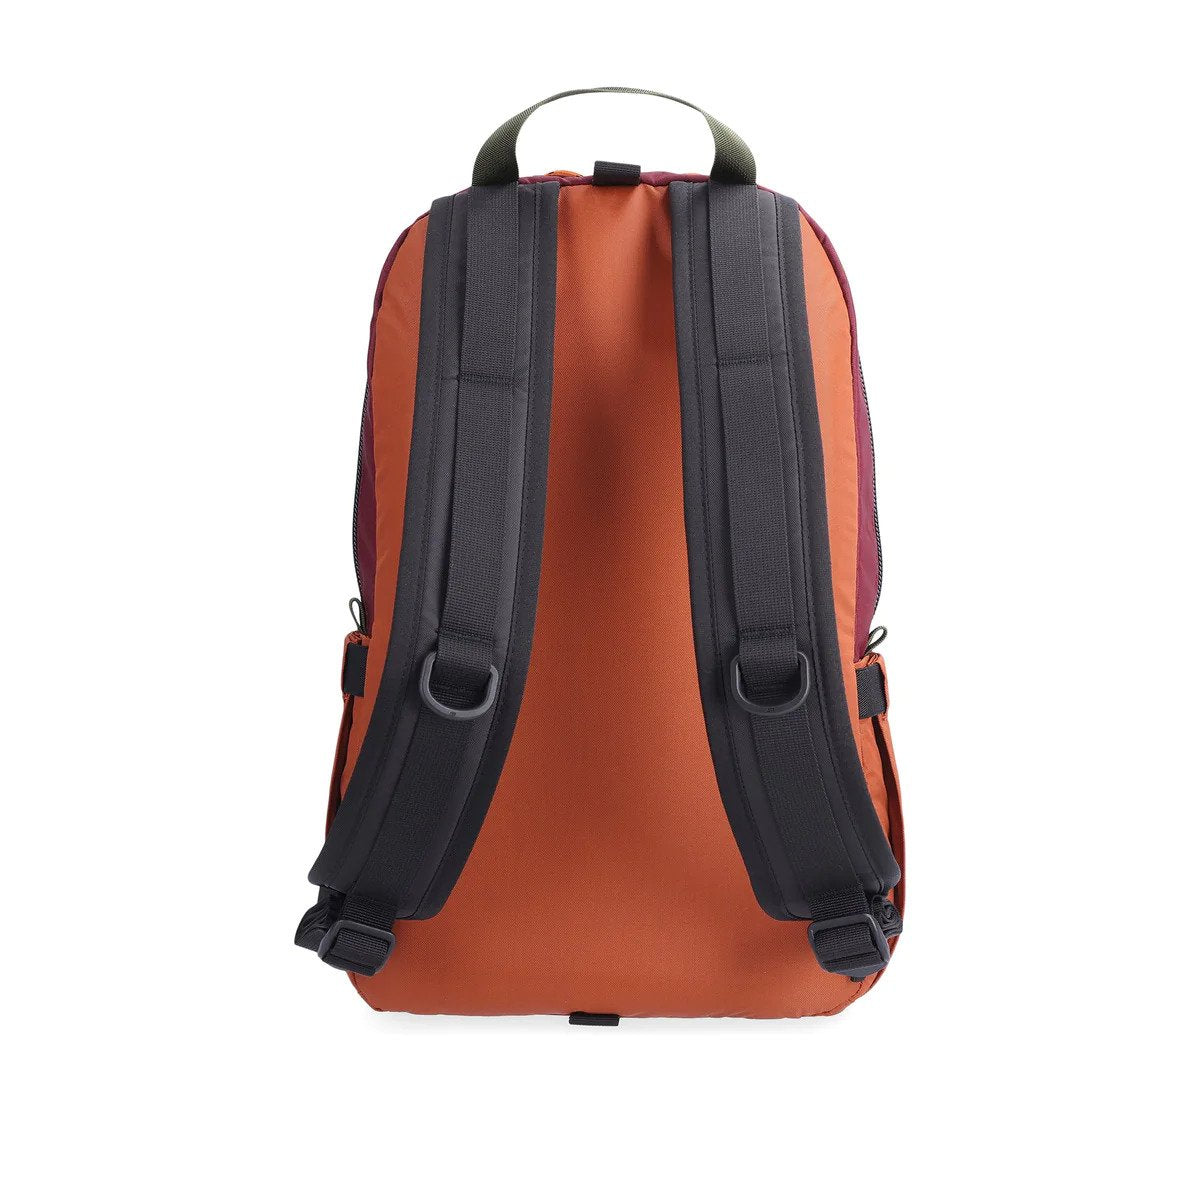 Back view of Topo Designs Light Pack in recycled "Mineral Blue / Peppercorn" nylon.